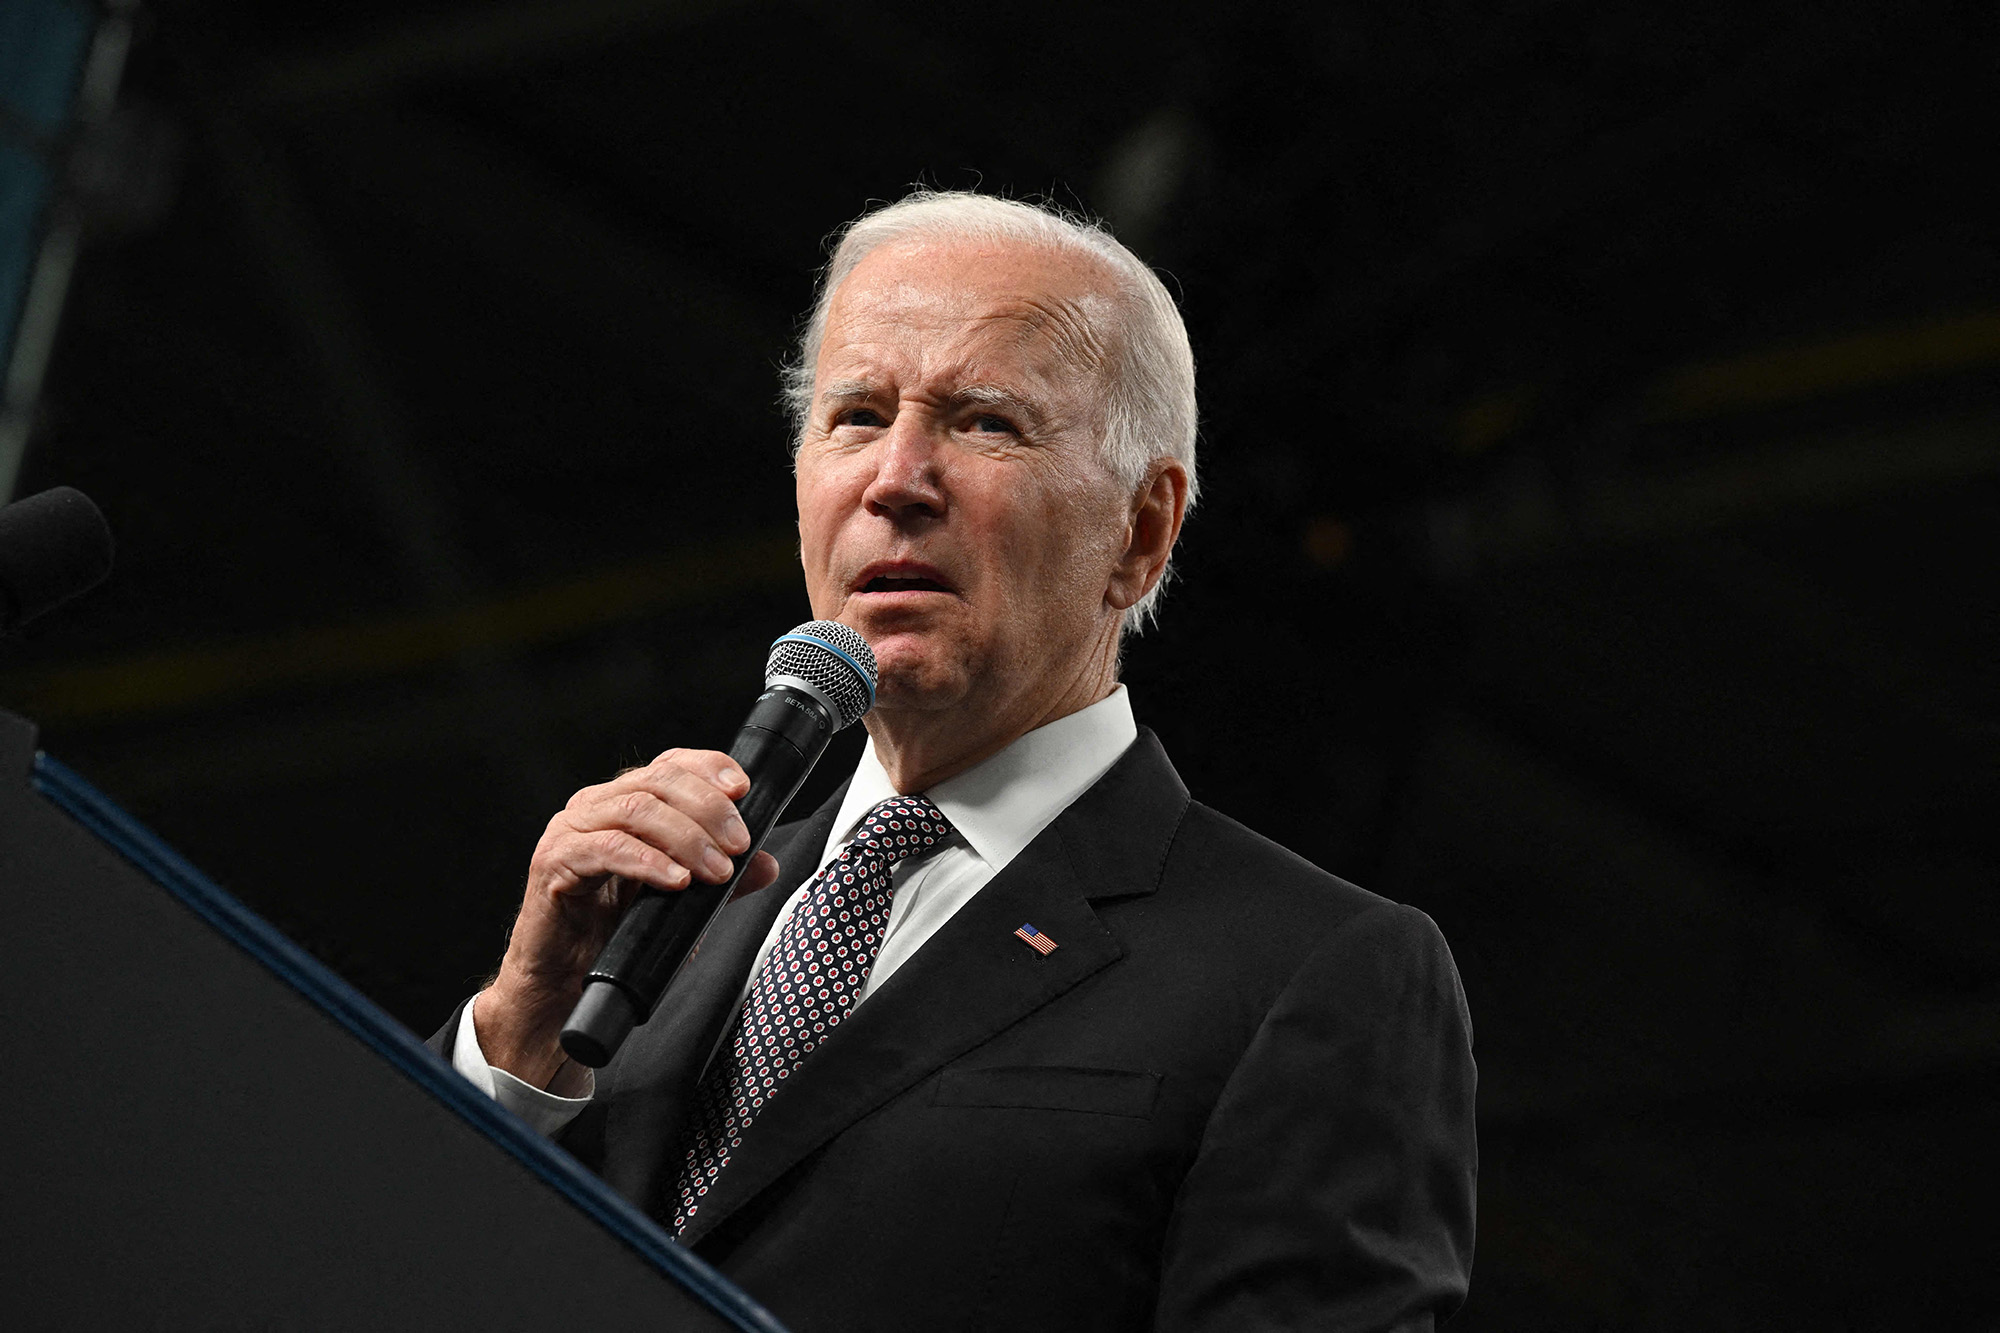 President Joe Biden delivers remarks at the IBM facility in Poughkeepsie, New York, on October 6.